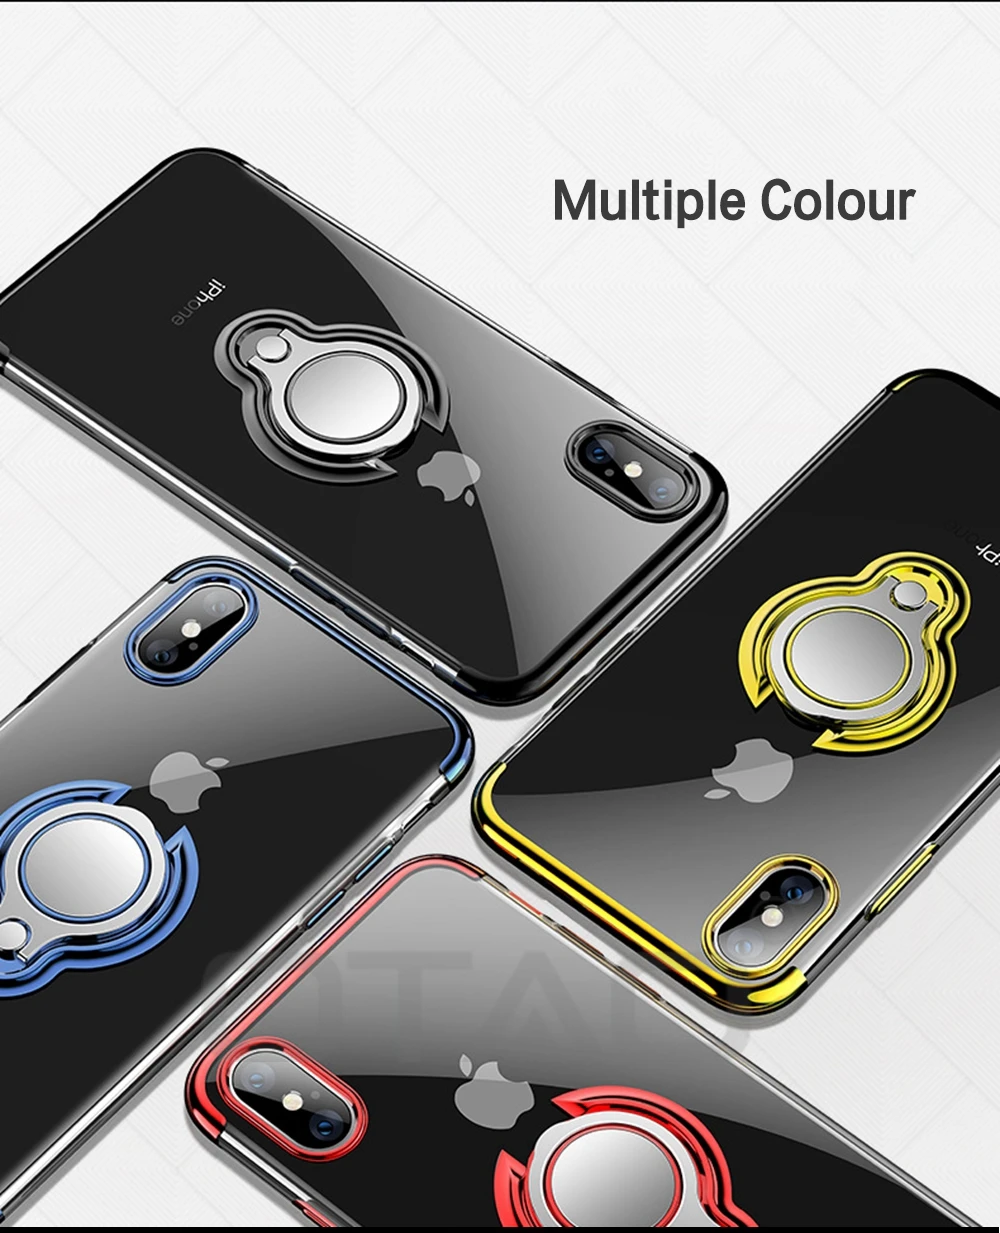 OTAO Ultra Thin Transparent Phone Case For iPhone XS MAX XR X 8 7 6 6S Plus Car Magnetic Cases Finger Ring Holder Cover Coque